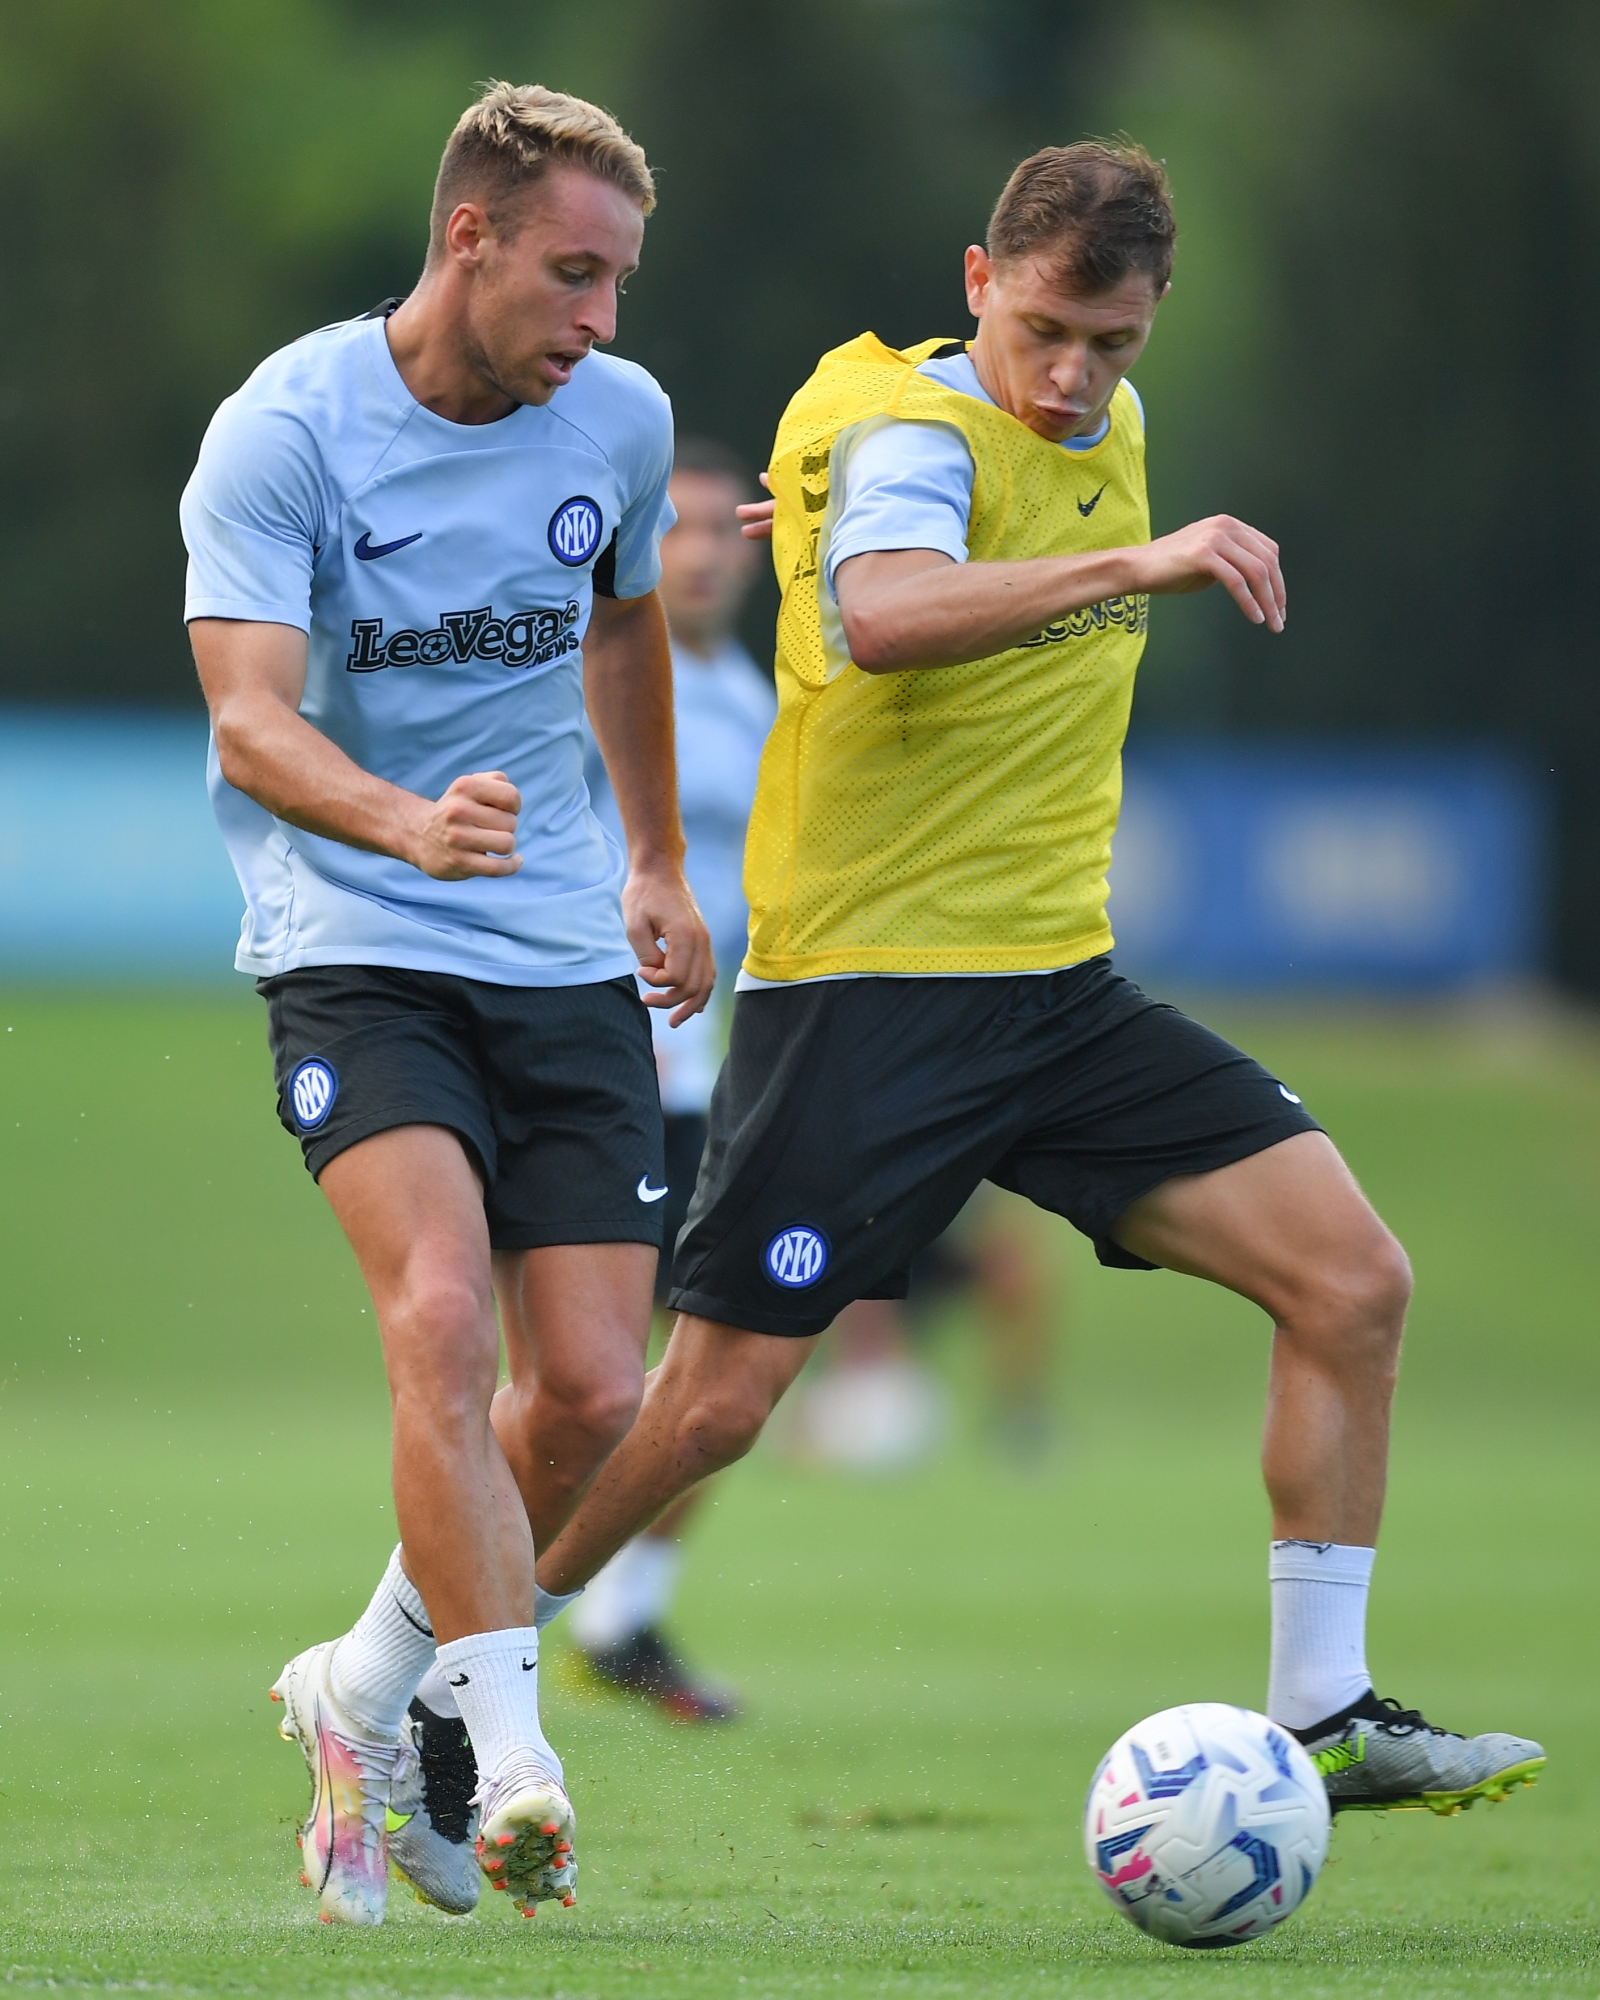 COMO, ITALY - AUGUST 16: Davide Frattesi of FC Internazionale in action during the FC Internazionale training session at Suning Training Center at Appiano Gentile on August 16, 2023 in Como, Italy. (Photo by Mattia Pistoia - Inter/Inter via Getty Images)